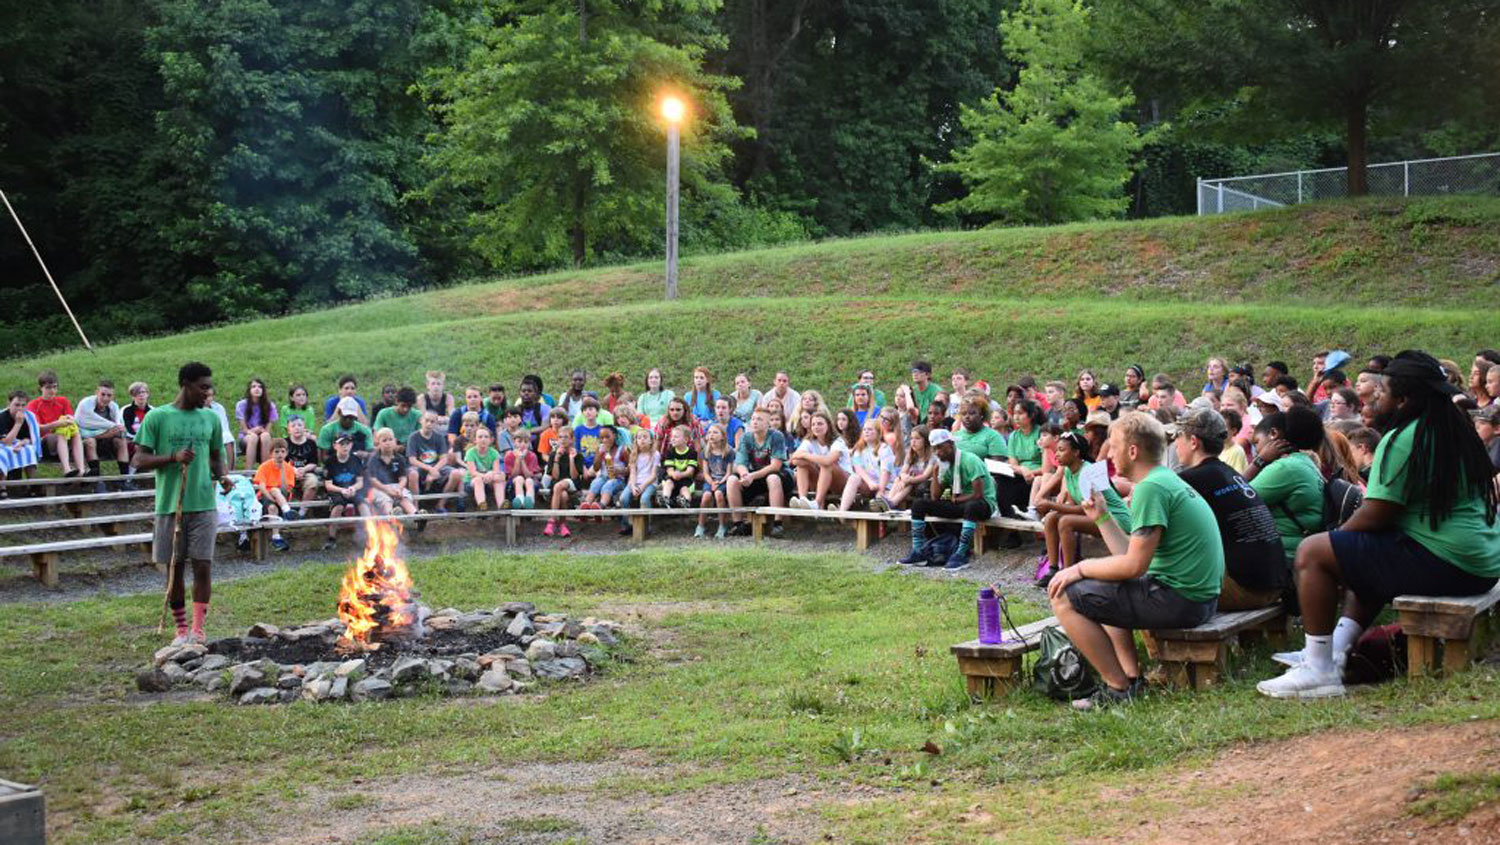 Campers sitting around a campfire.